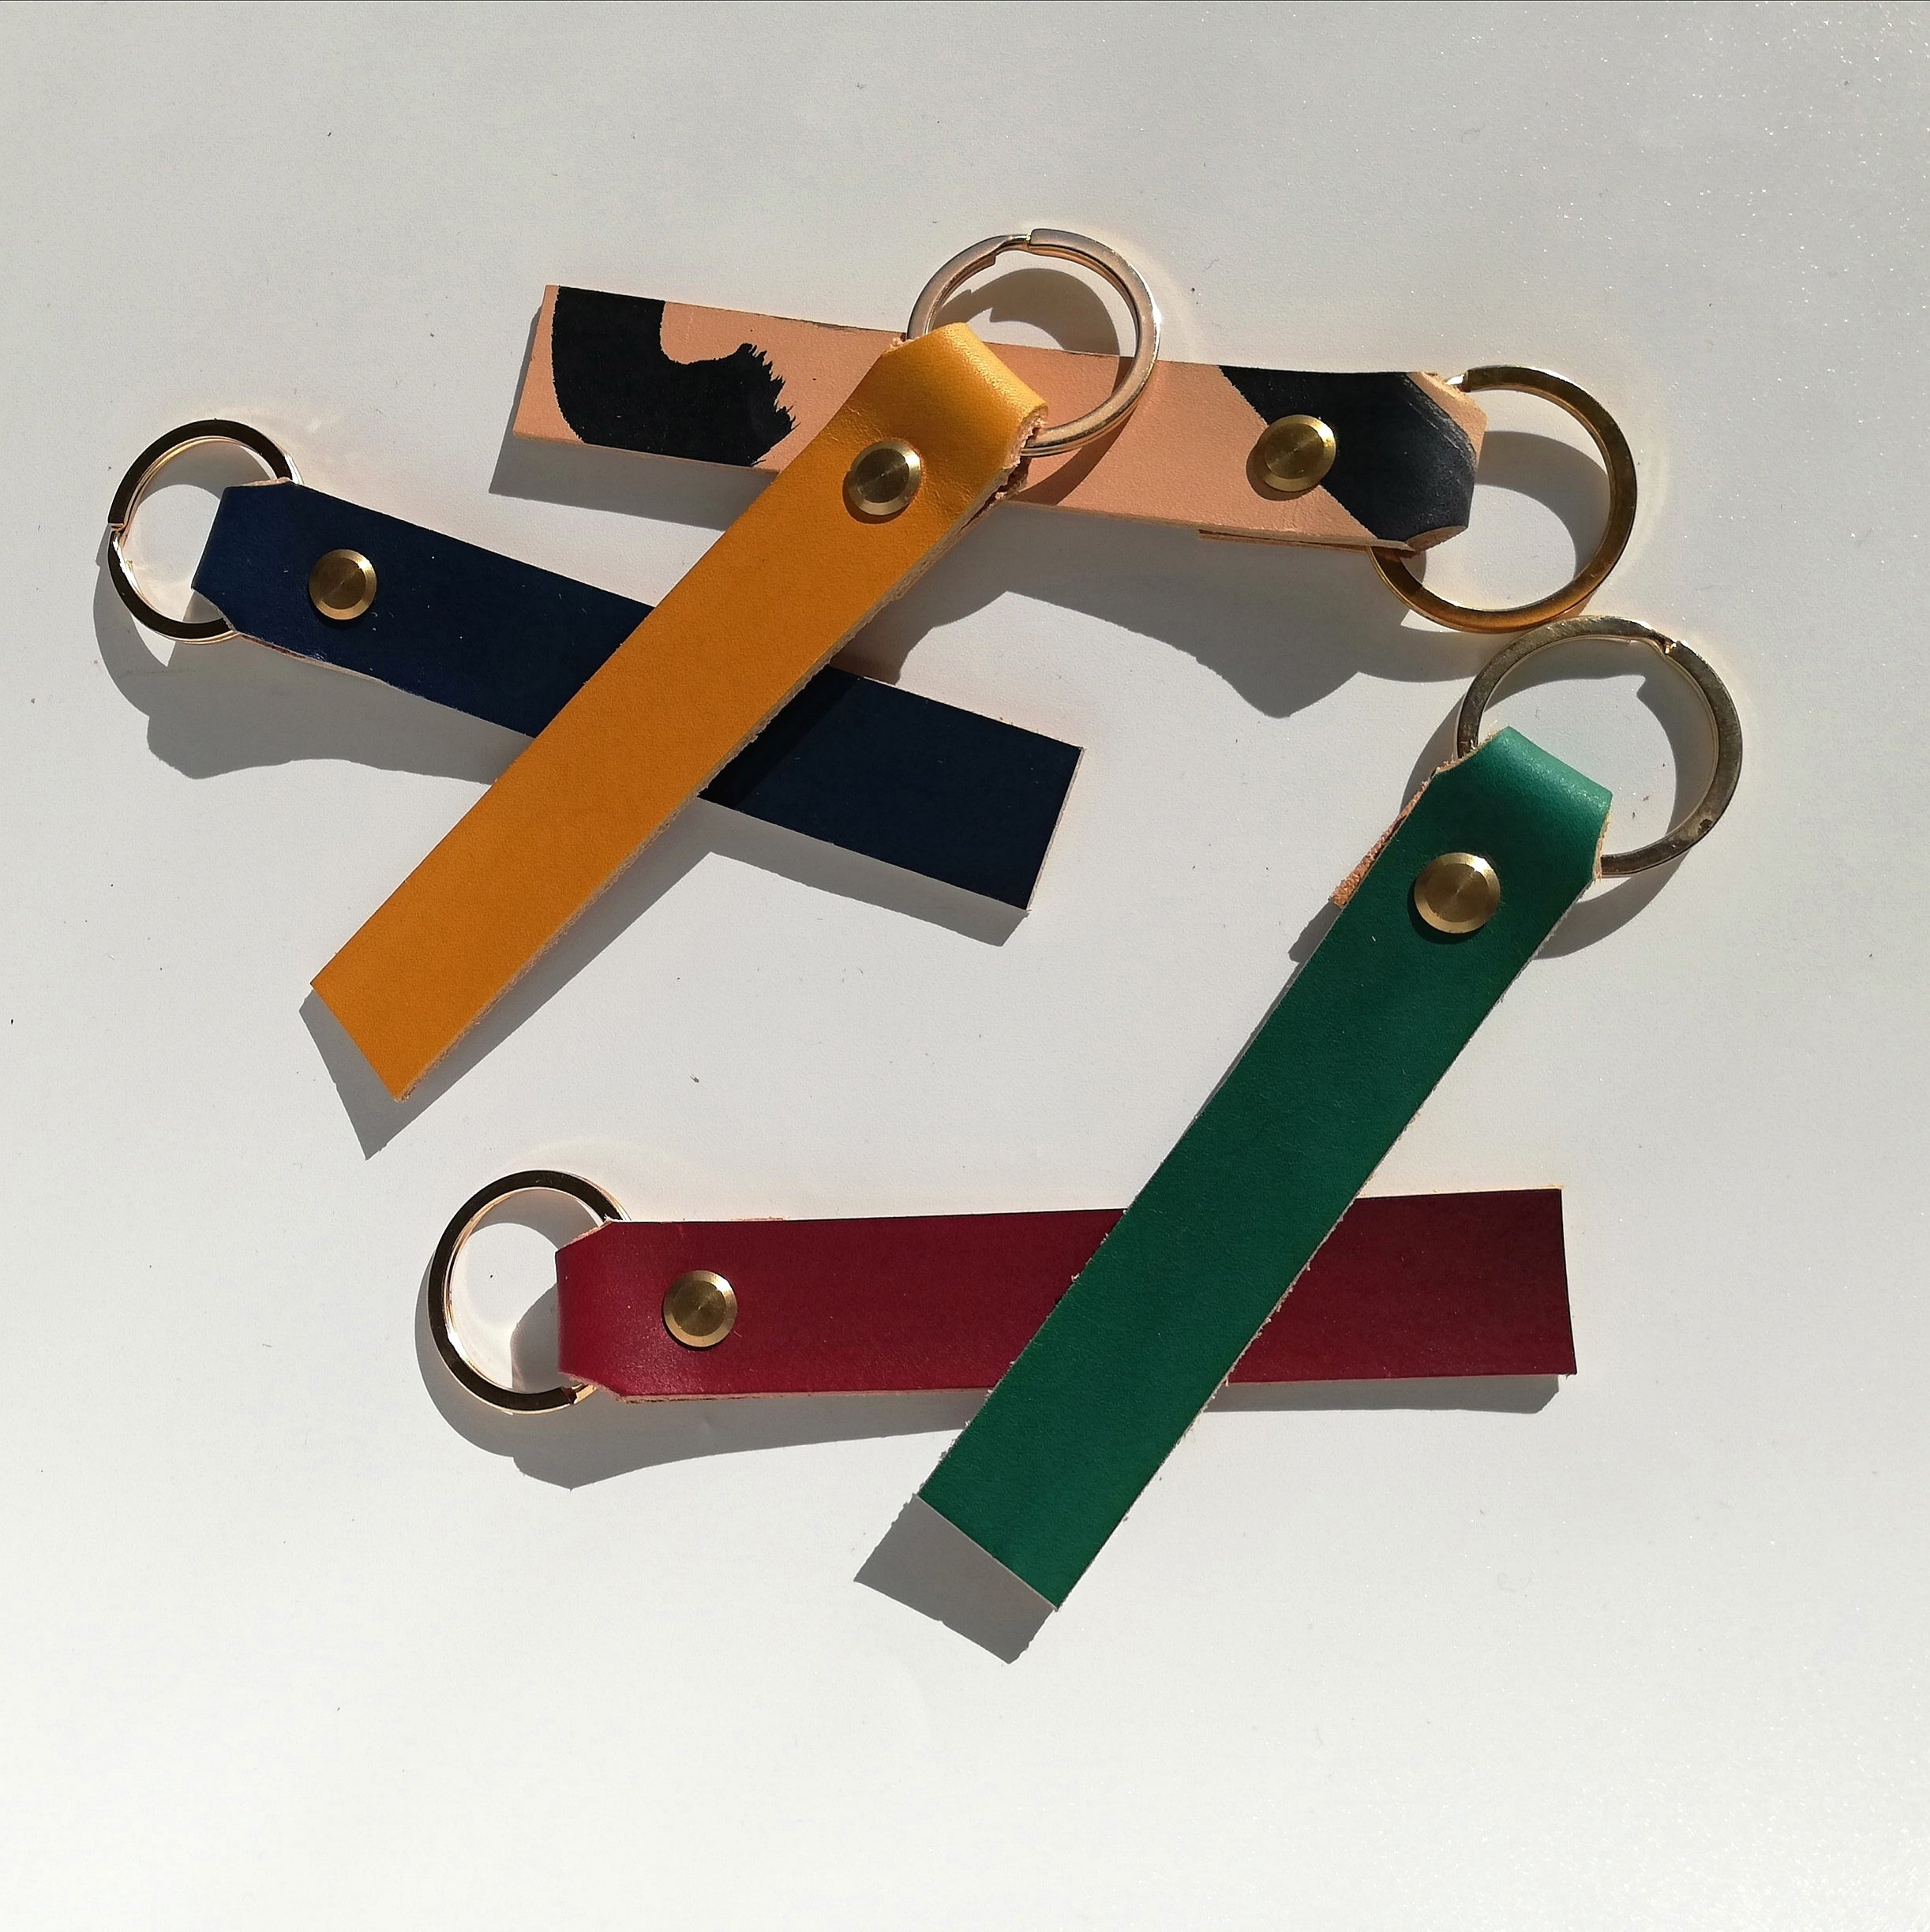 Handmade personalised leather keyring - Hand Painted/Dyed